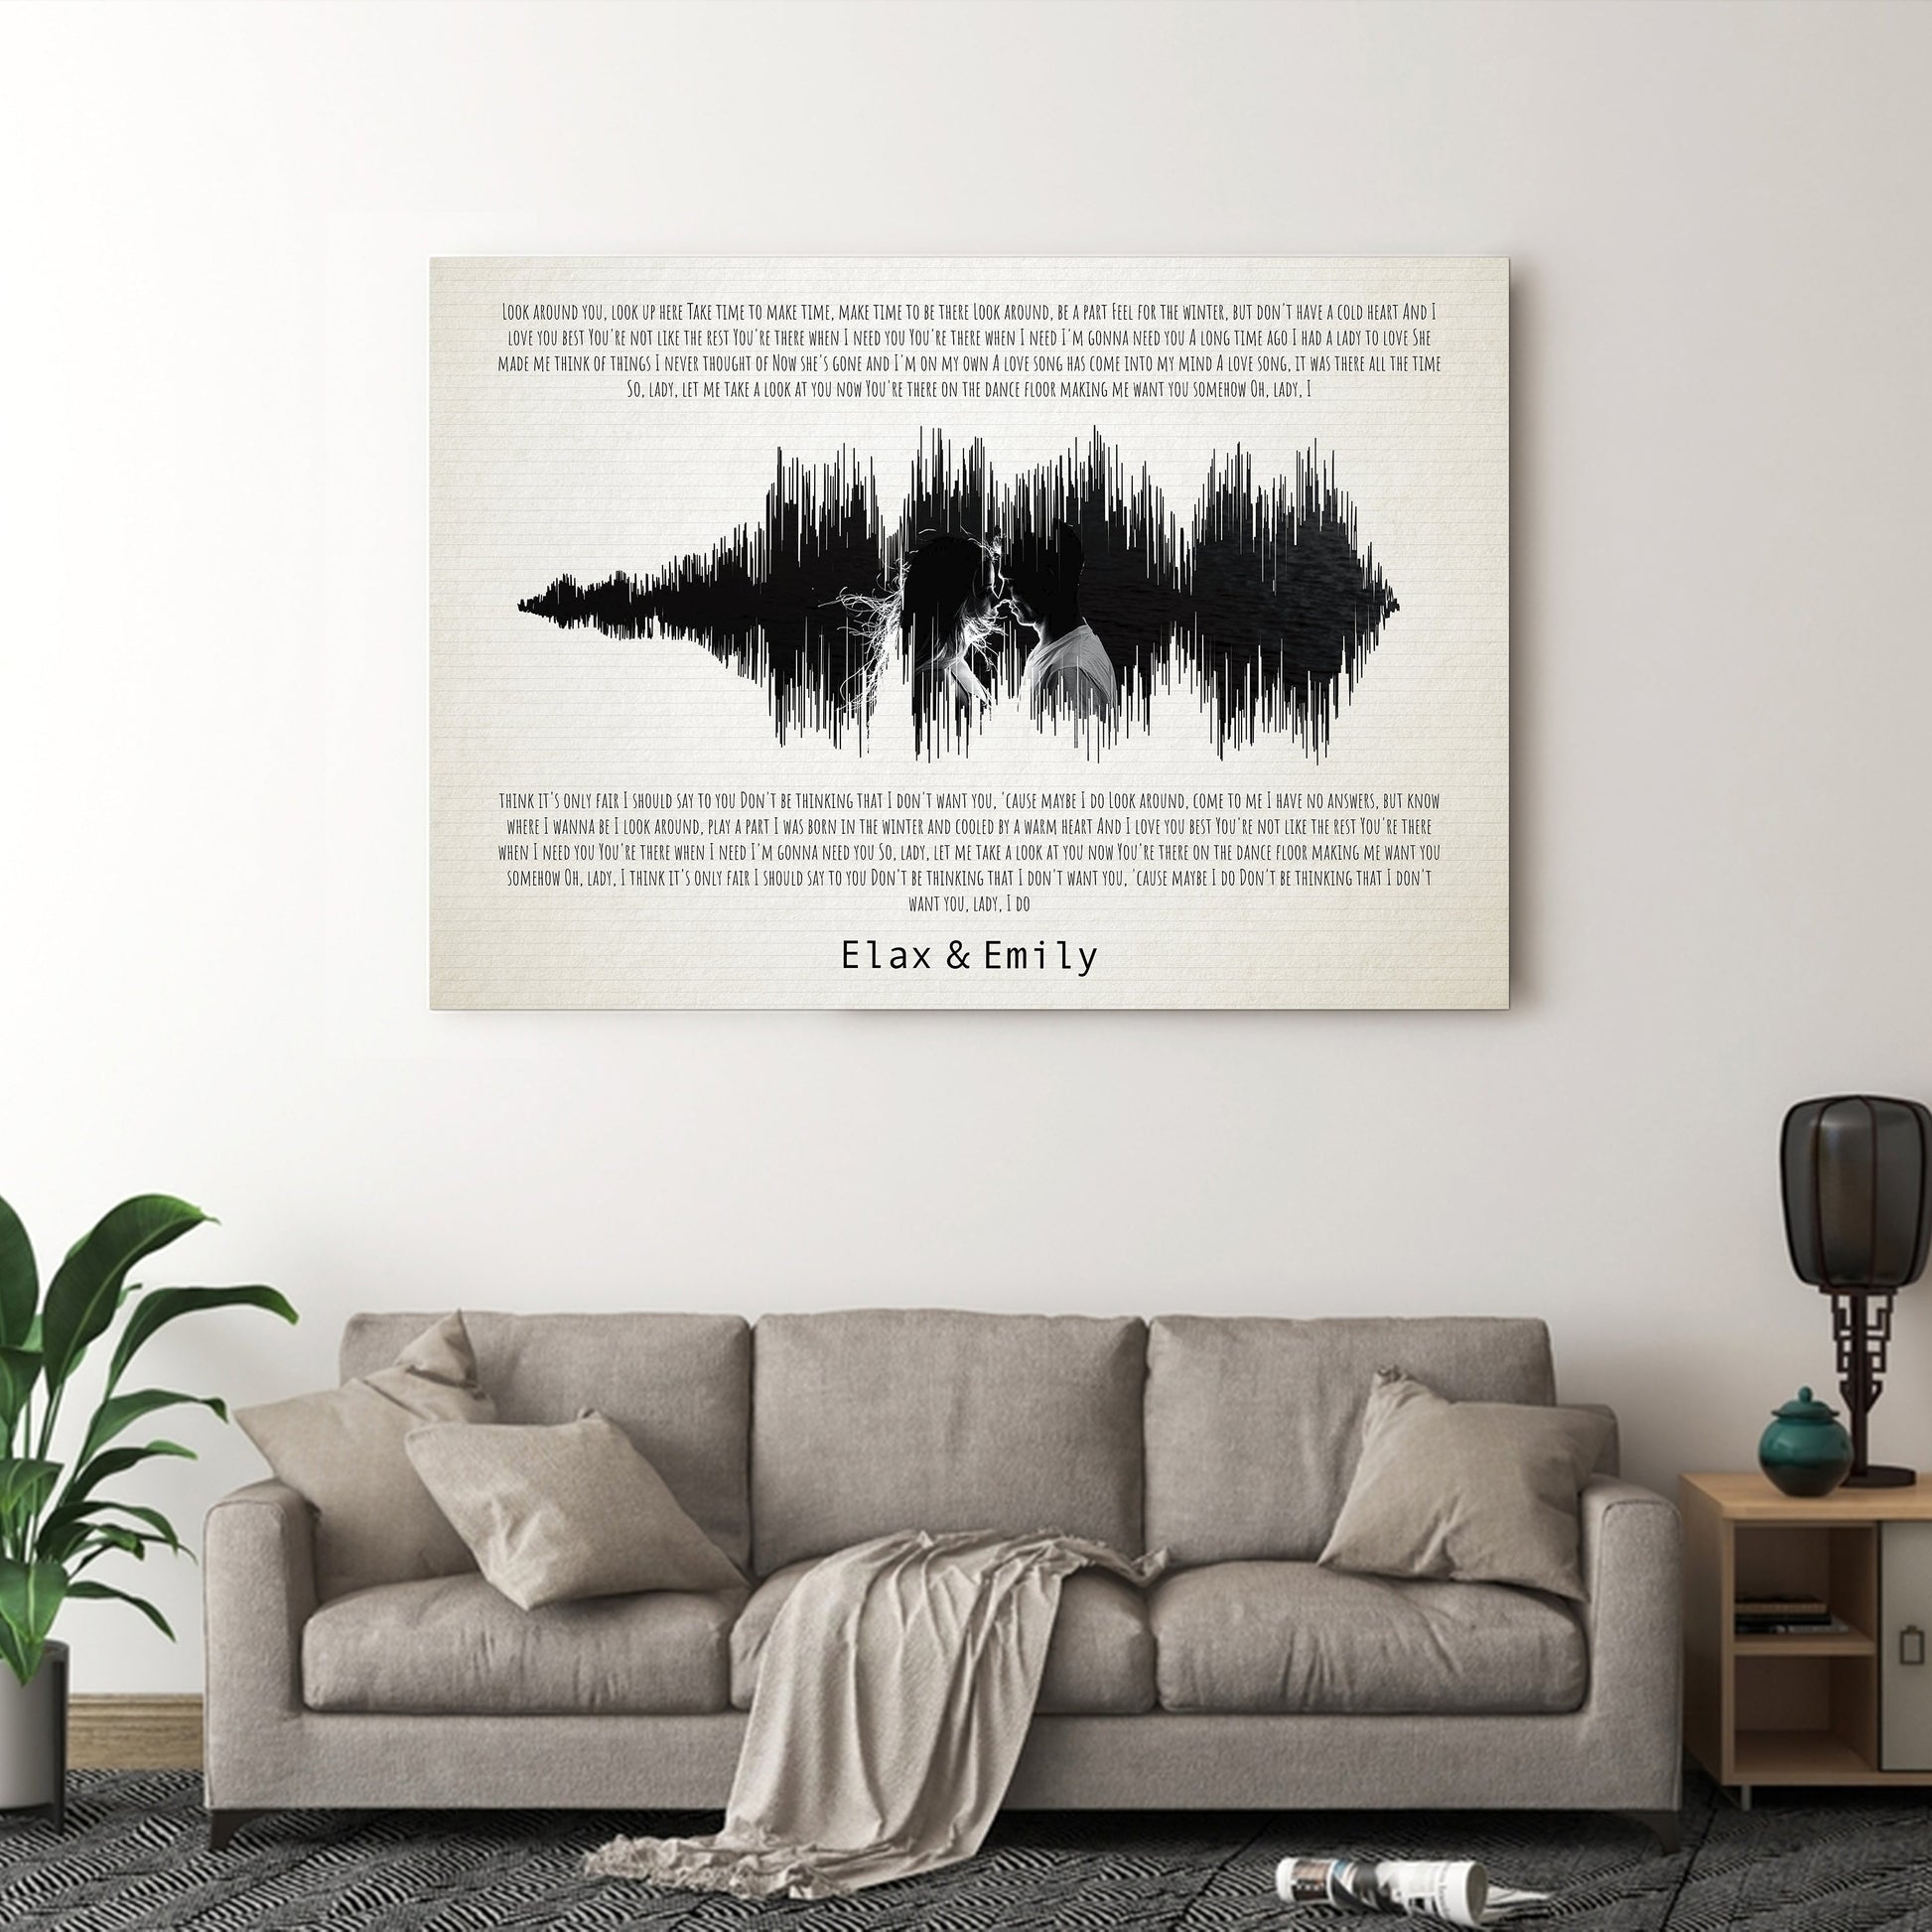 Soundwave wall art with personalized song lyrics - unique custom gift.